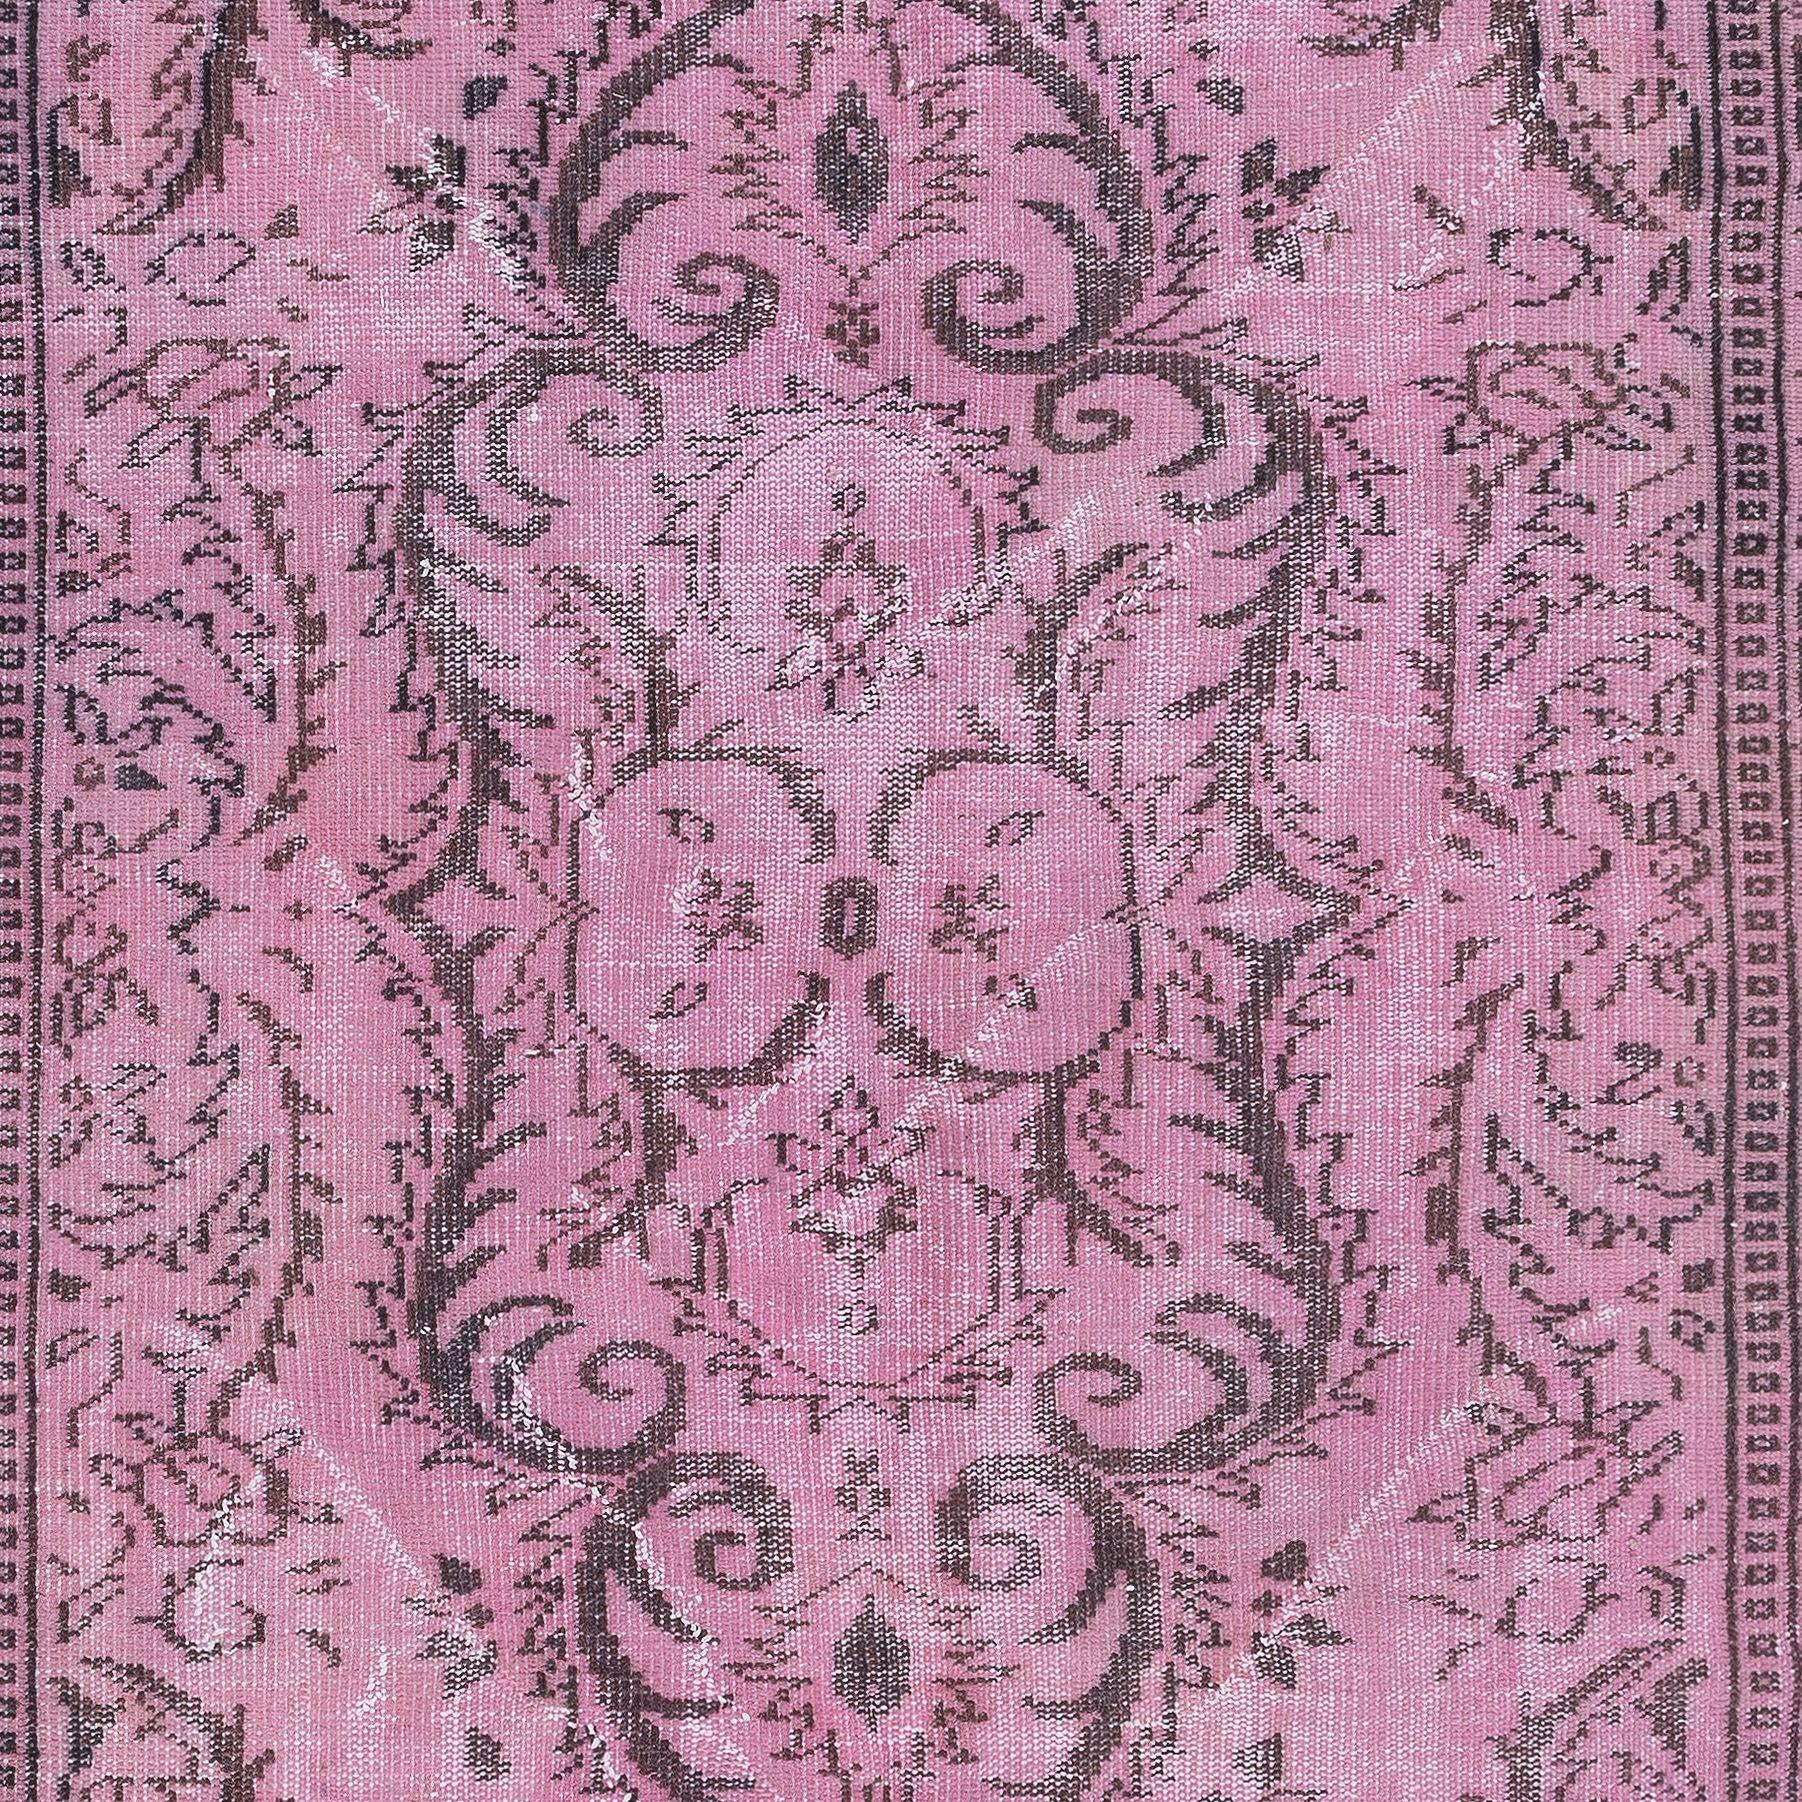 Hand-Knotted 5x9 Ft Rustic Turkish Area Rug, Pink Handmade Modern Carpet, Floor Covering